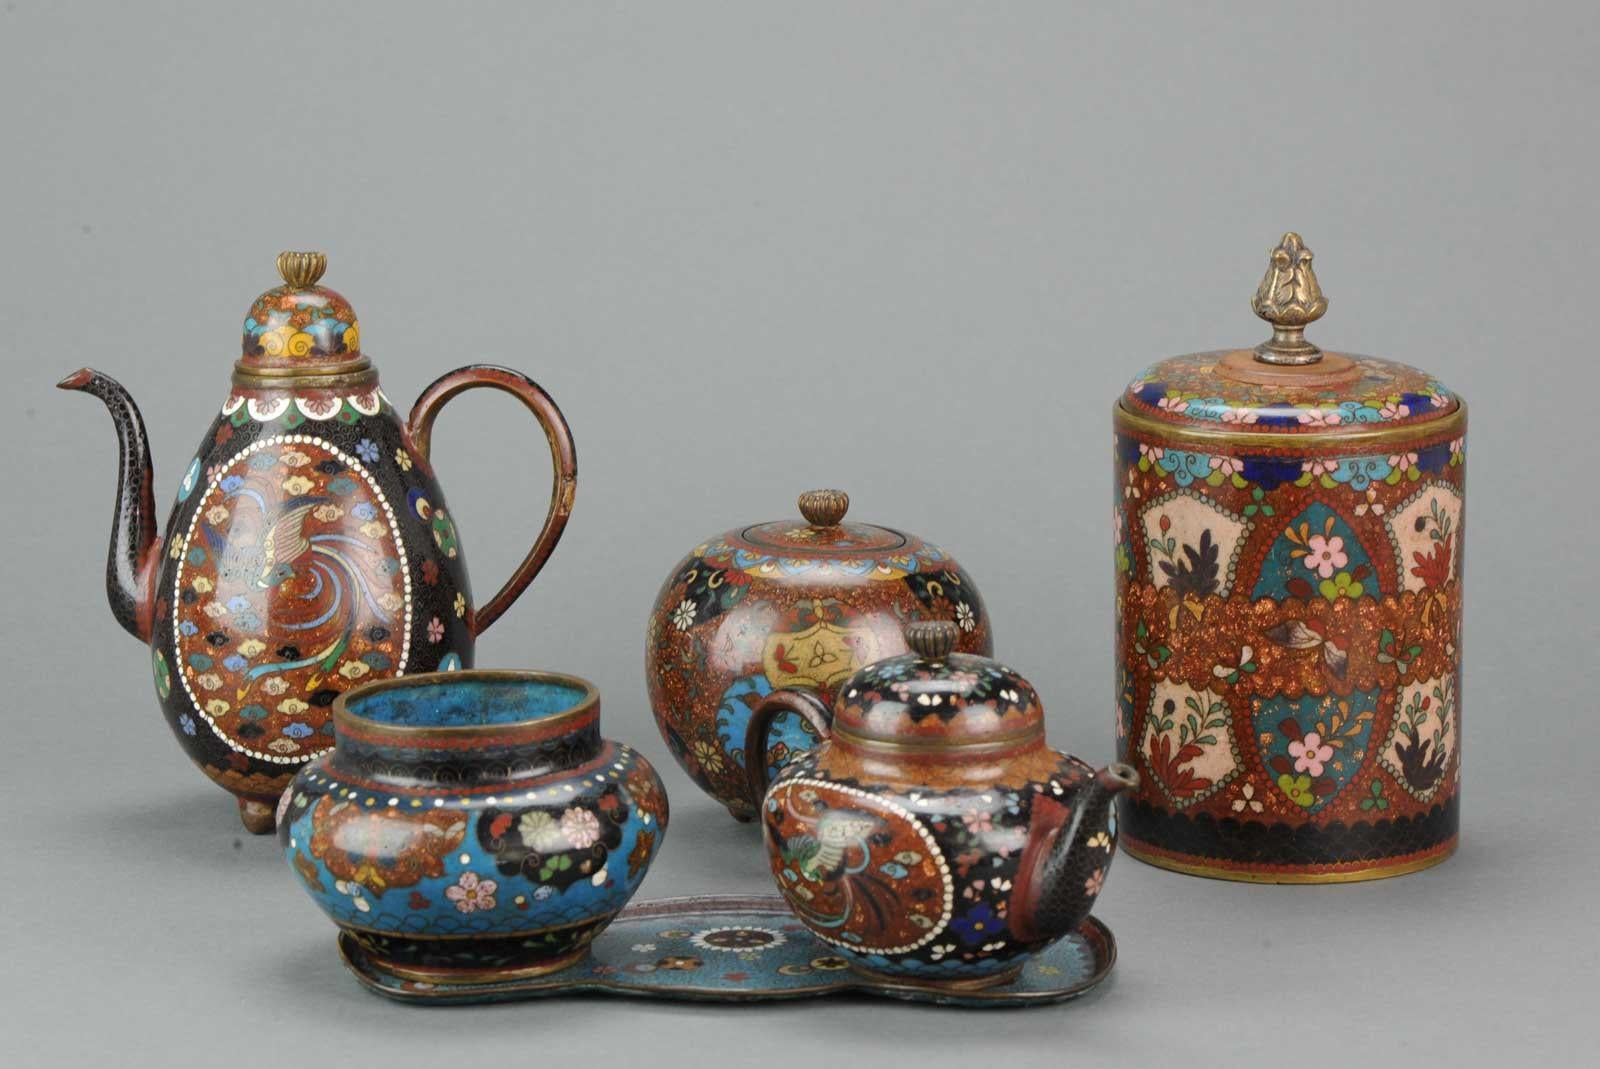 An interesting an nicely made Set. Lovely decoration.
5-6-18-AR-326
Condition
Overall Condition Minor damages such as some cloisonne loss to handle, one with a repainted base. Size between 65mm - 165mm high
Period
19th century
20th century